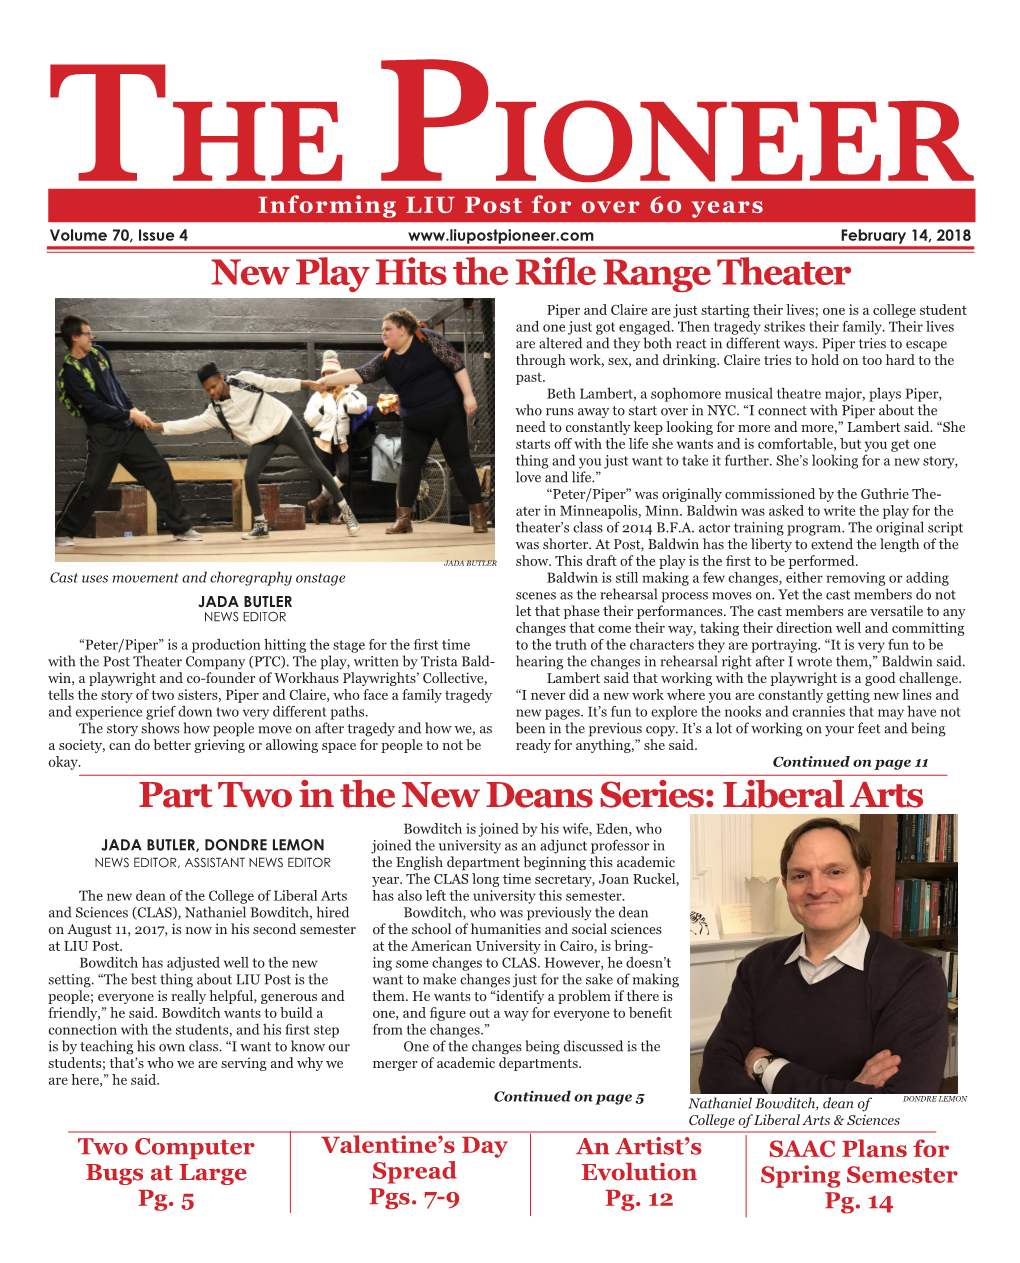 New Play Hits the Rifle Range Theater Part Two in the New